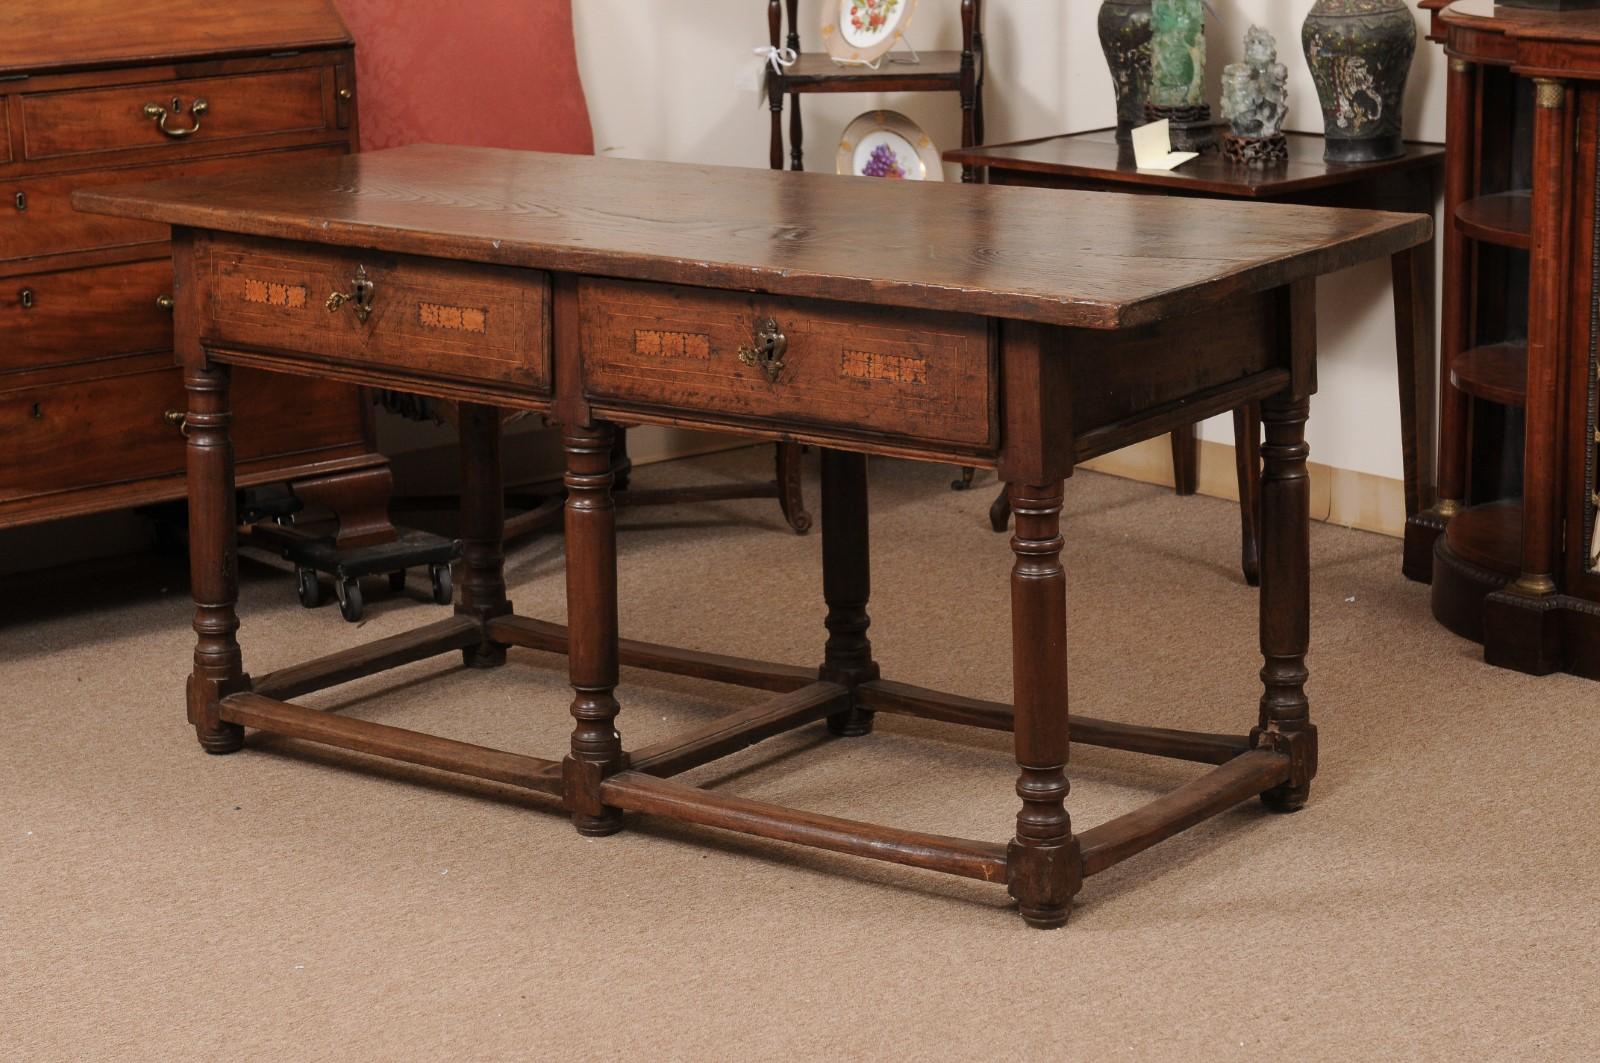  17th Century Italian Refractory Table in Elm with Inlay, 2 Drawers & Turned Leg 8